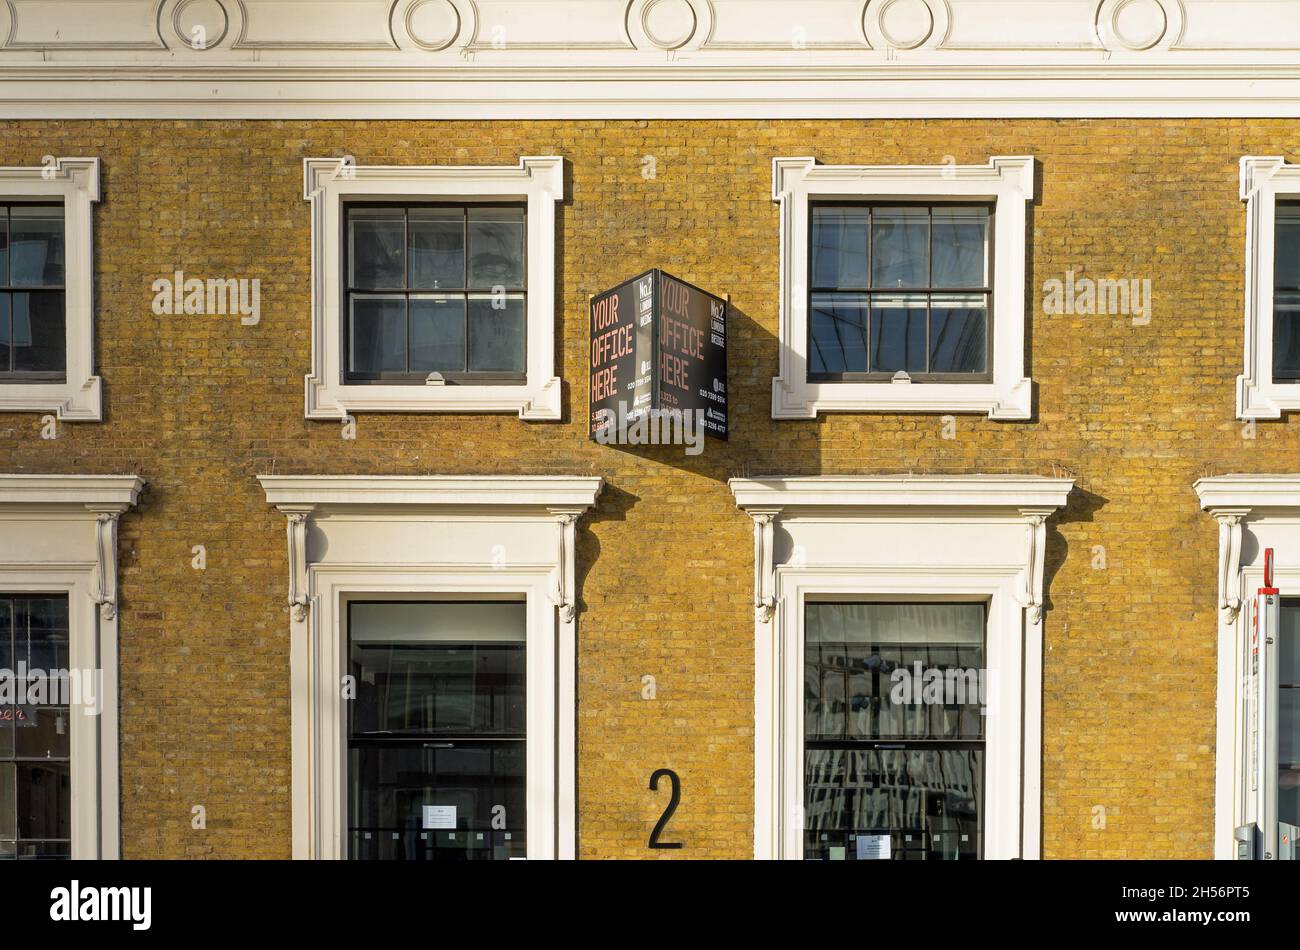 Office To Let sign on a brick wall of an office building in London Stock Photo